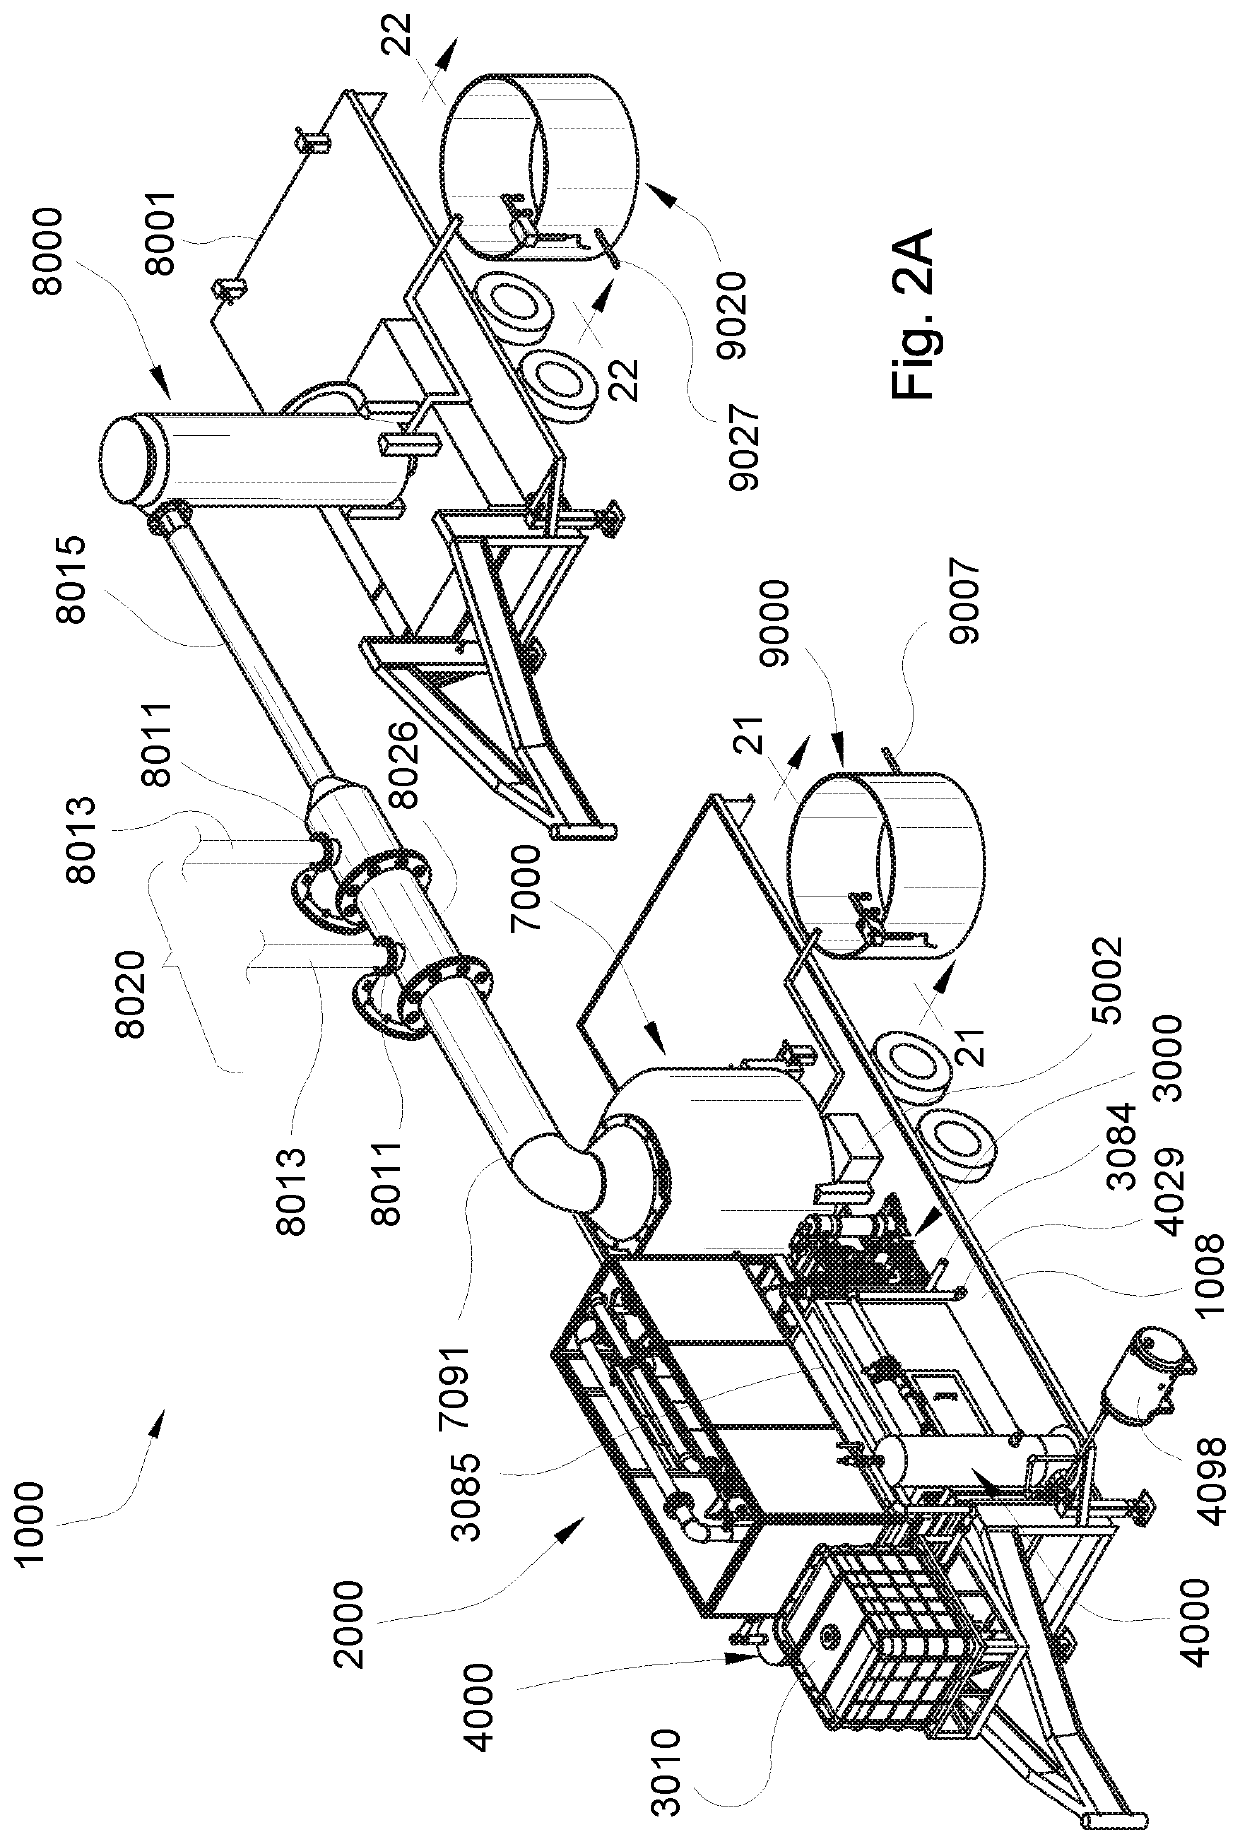 Evaporation apparatus for treating waste water